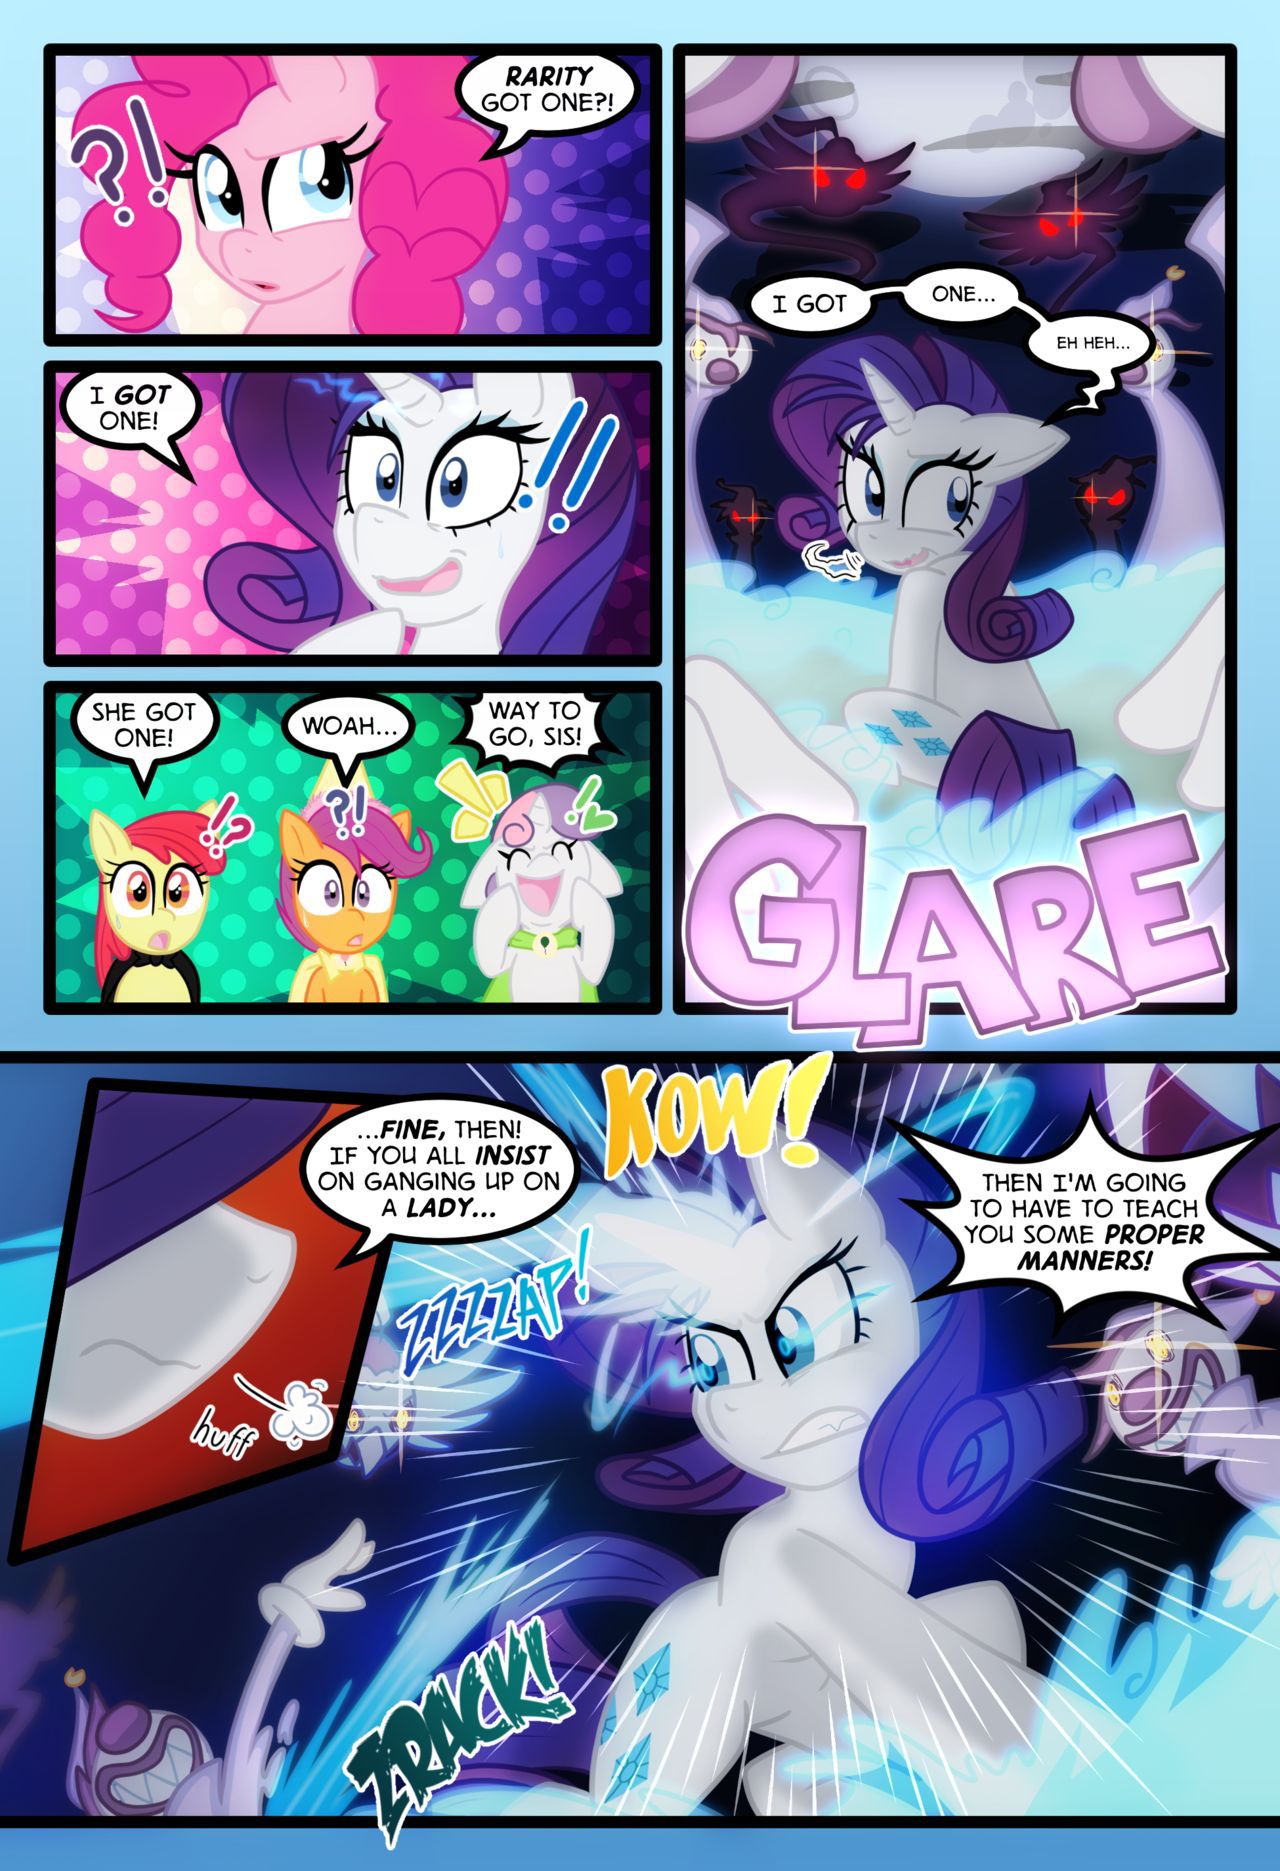 [Zaron] Lonely Hooves (My Little Pony Friendship Is Magic) [Ongoing] 147